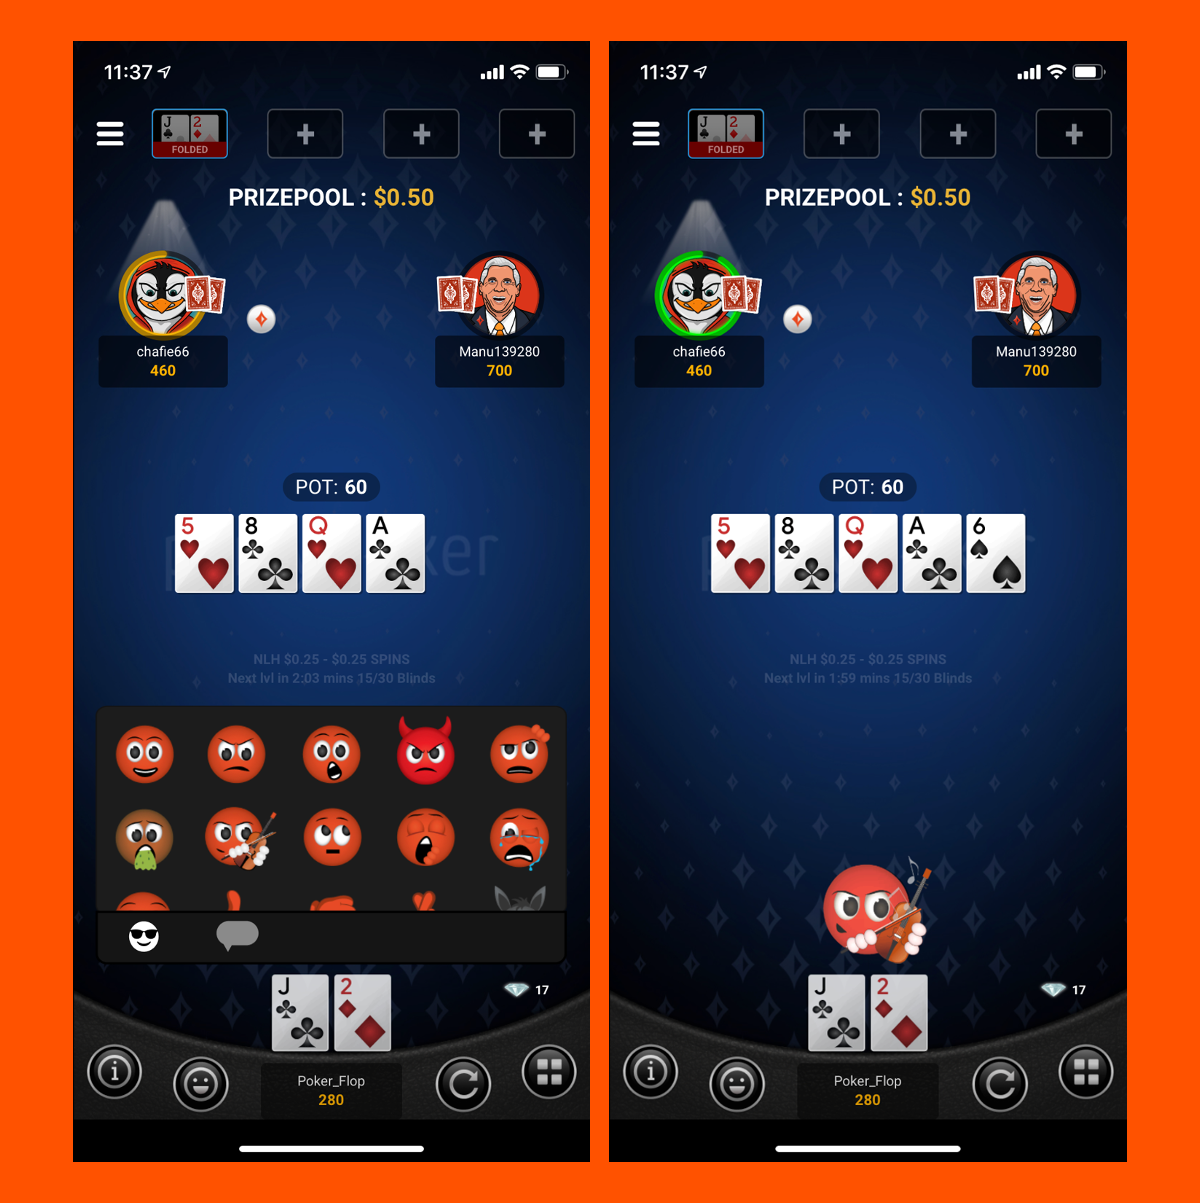 Partypoker's New Mobile App First Look: The Emojis